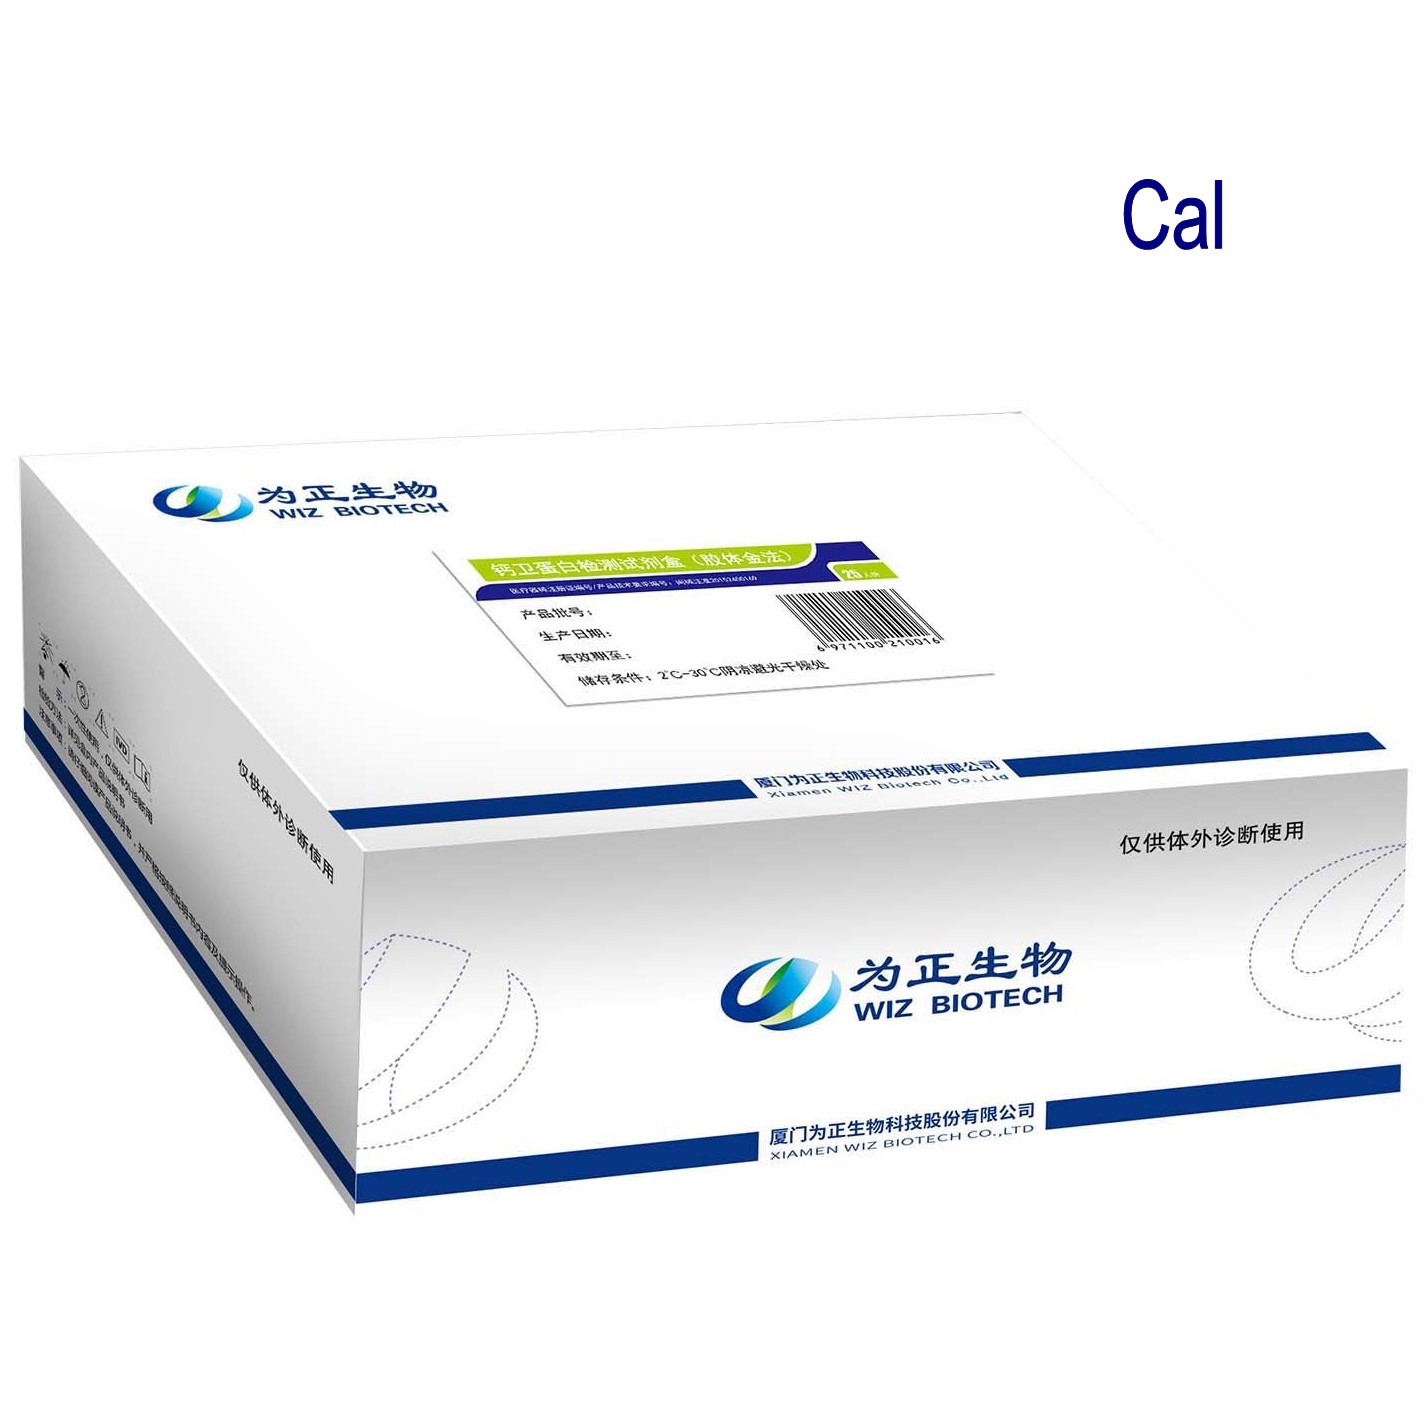 2017 Good Quality Diagnostic Rpaid Test - Diagnostic Kit（Colloidal Gold）for Calprotectin – Baysen